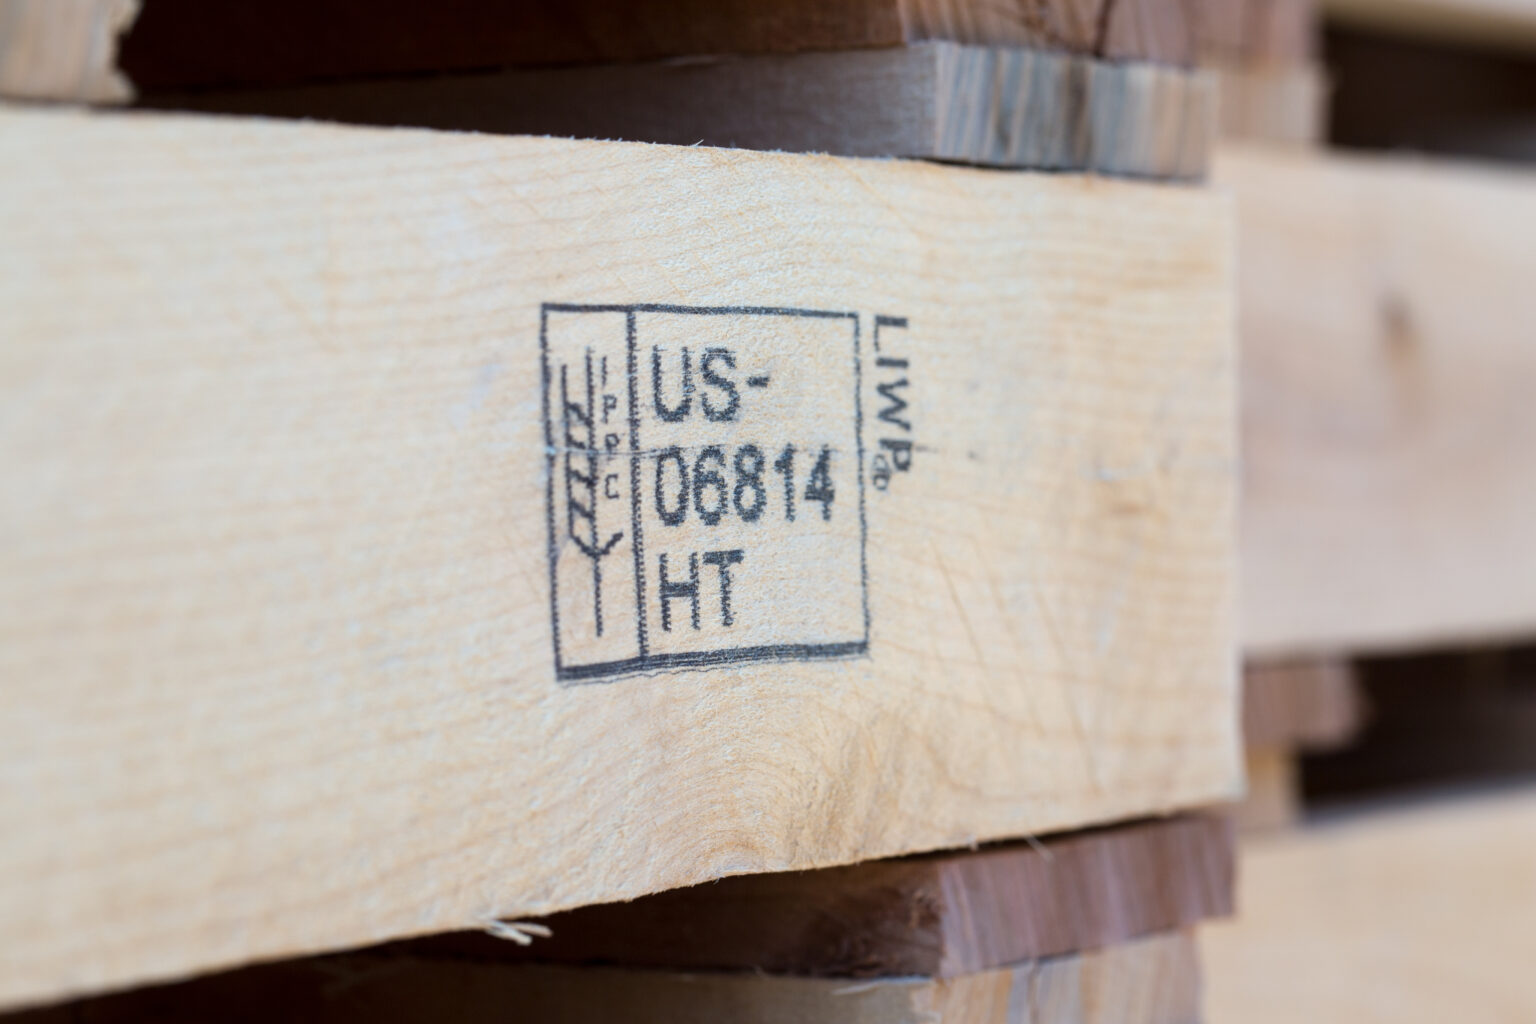 Closeup of a ISPM-15 heat treated stamp on a pallet.